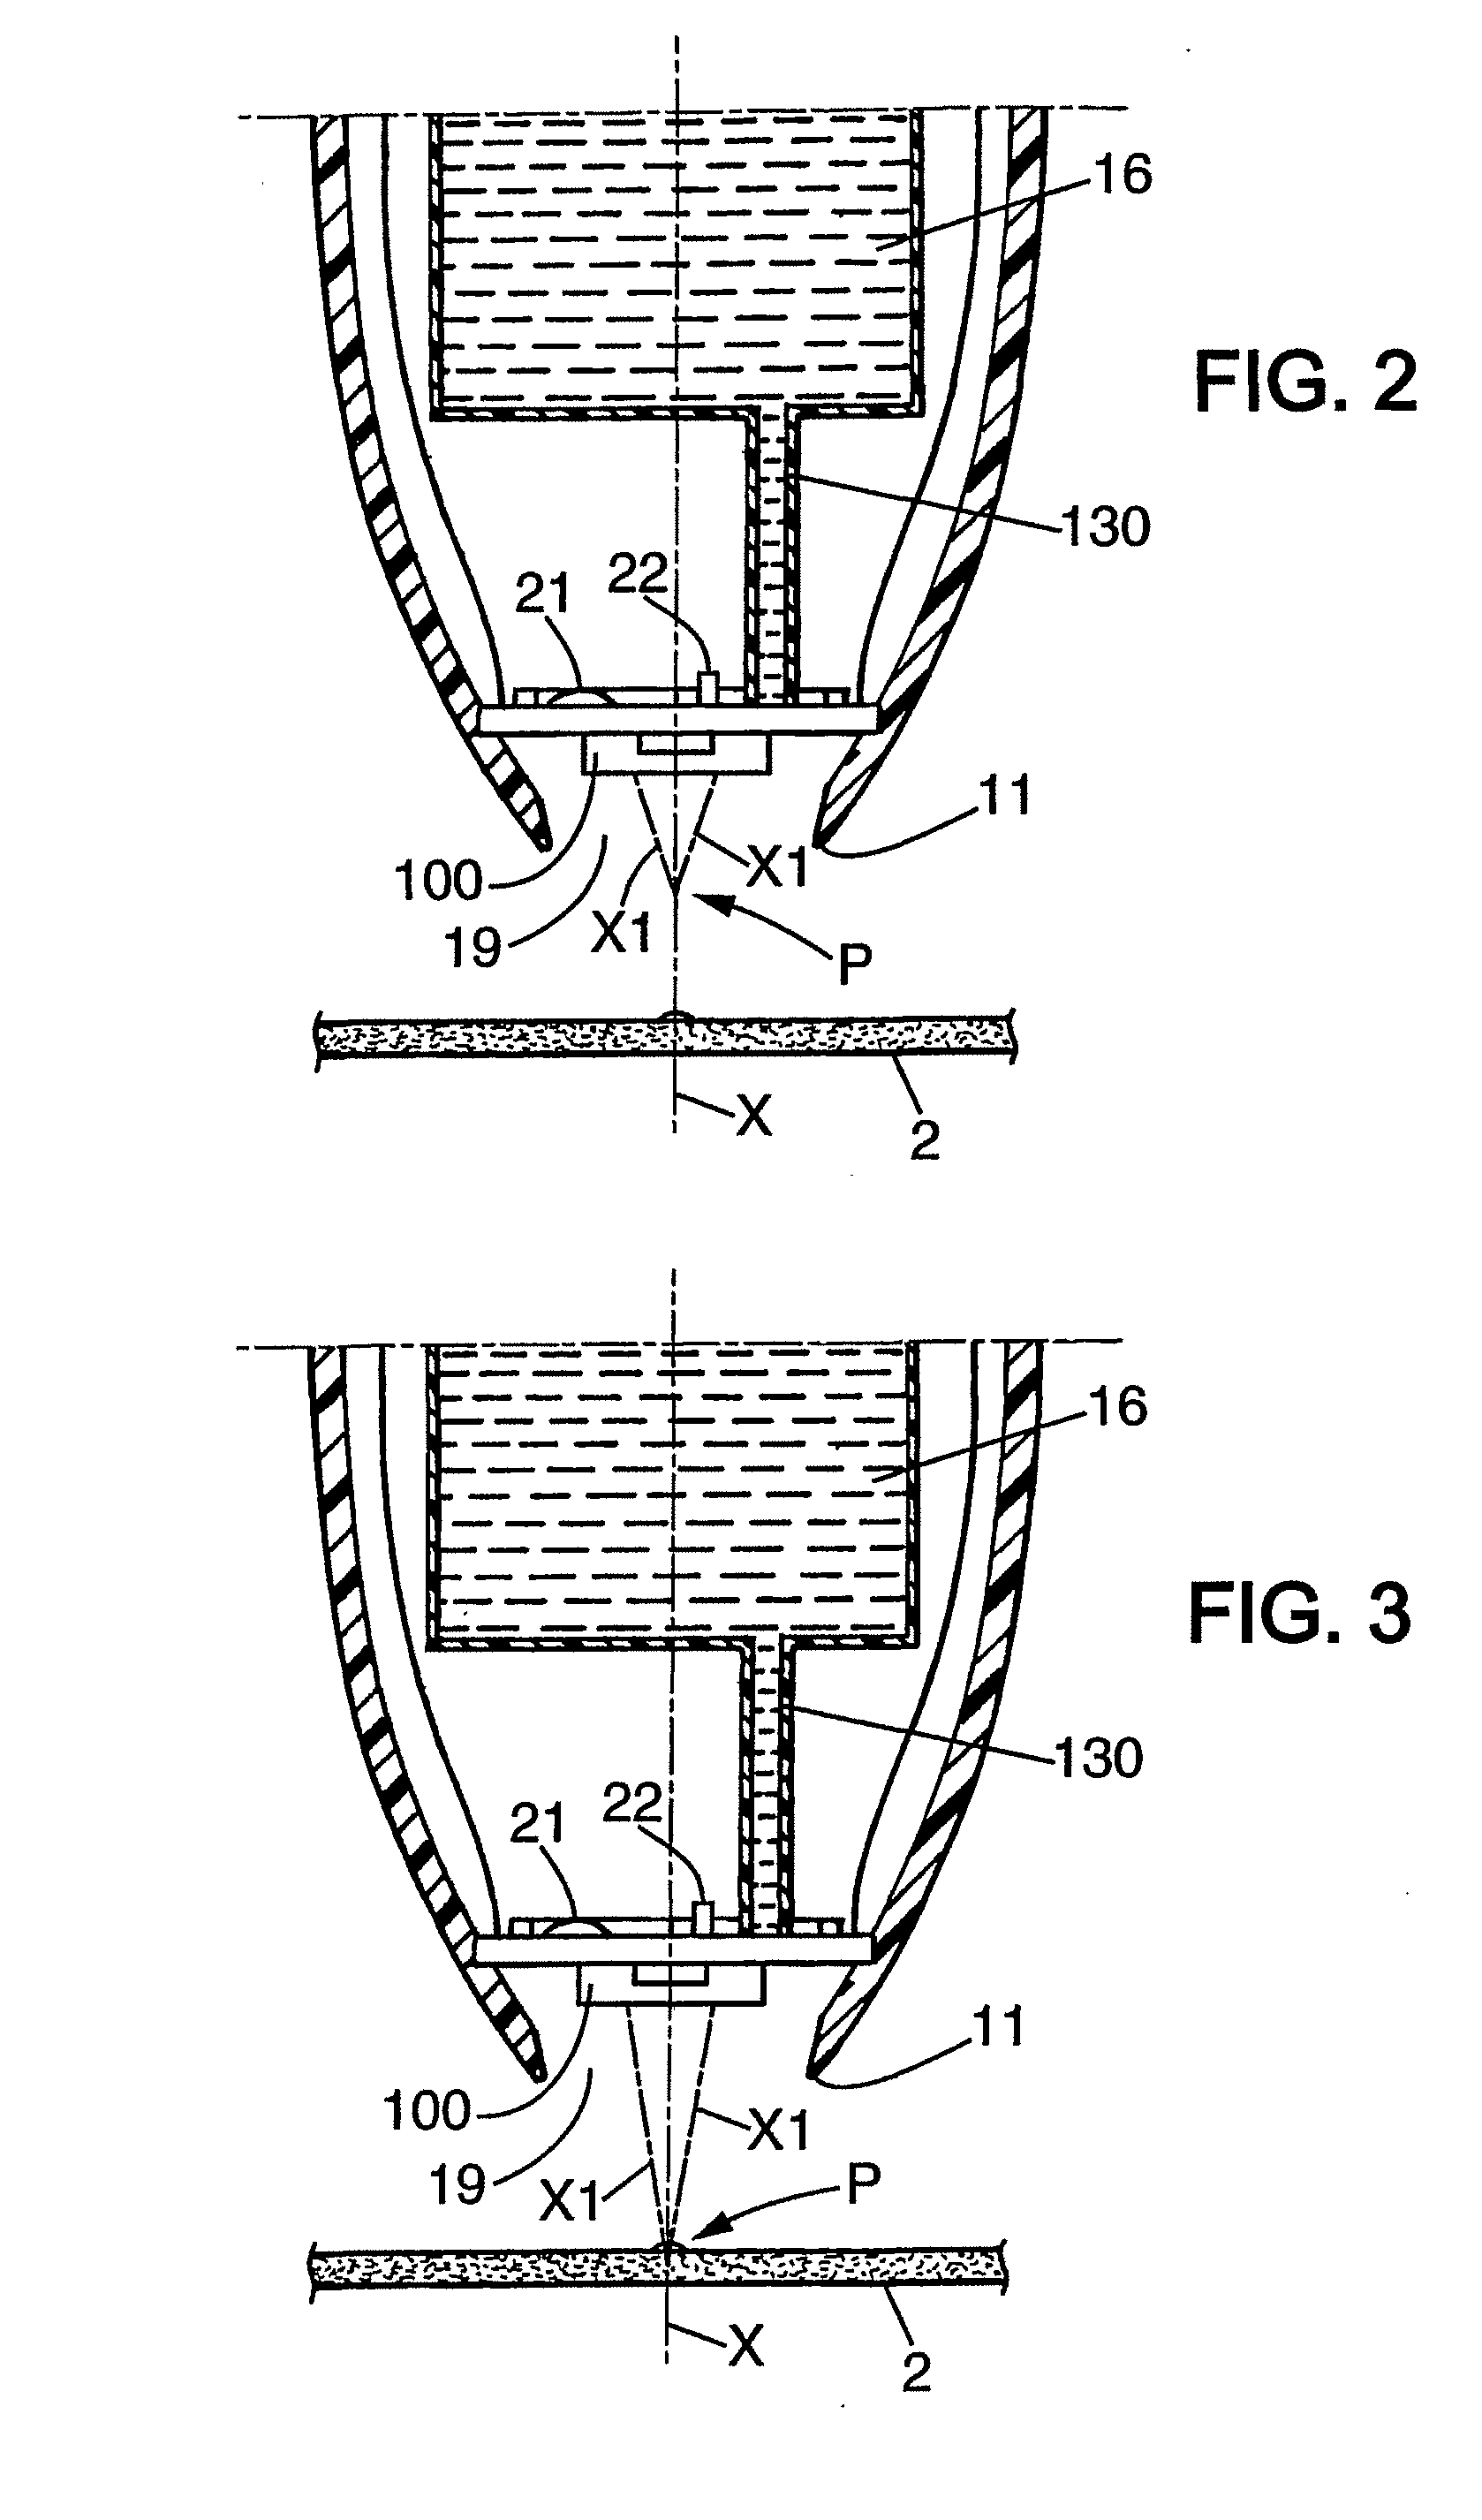 Multi-Nozzle Liquid Droplet Ejecting Head, a Writing Instrument Comprising Such a Head, and a Method of Ejecting Liquid Droplets From Same